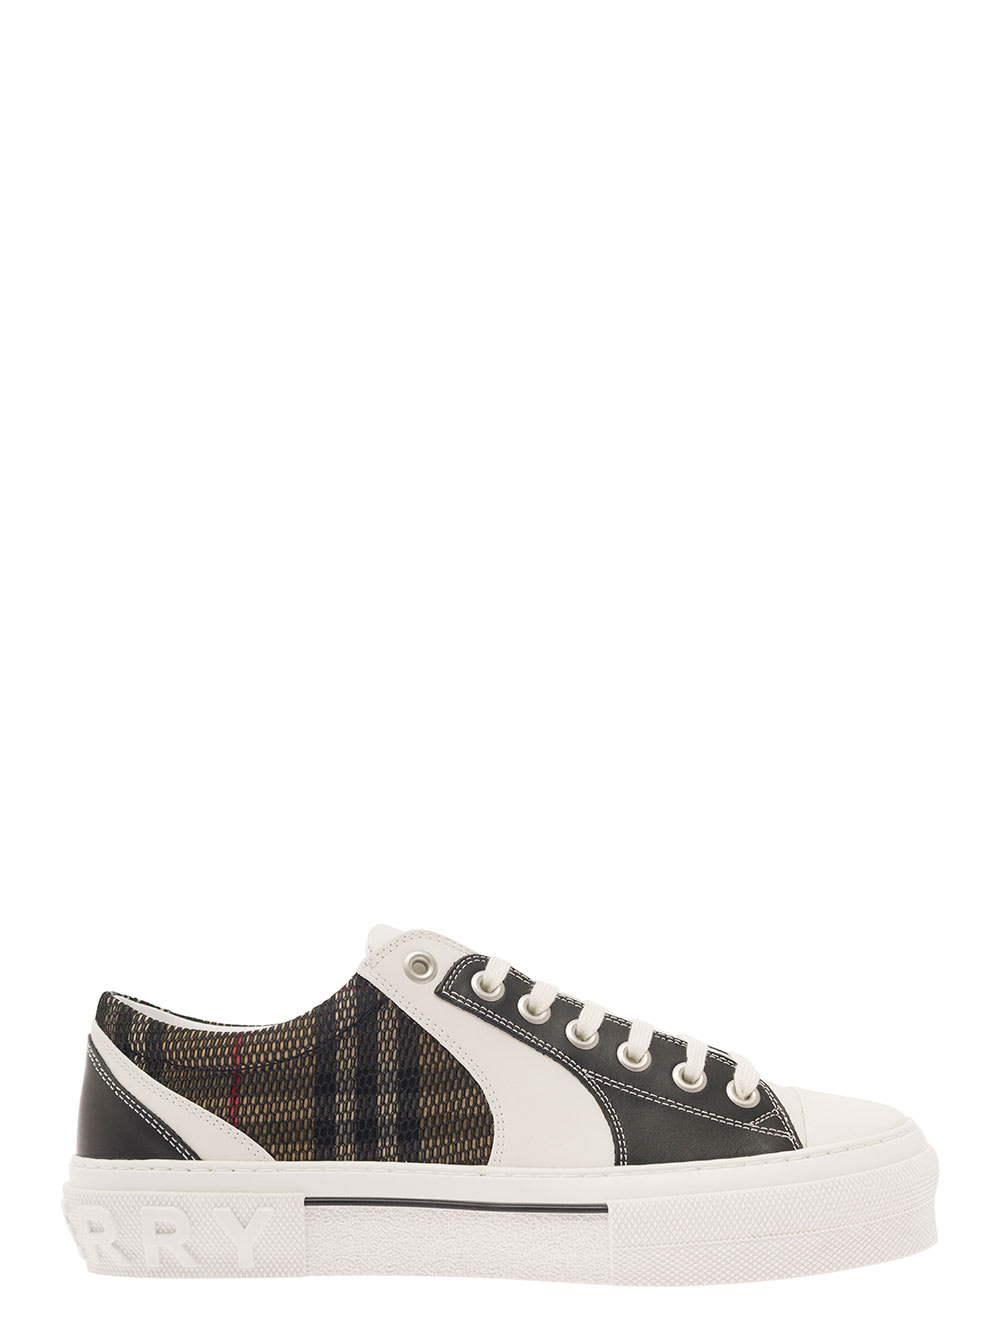 BURBERRY BROWN SNEAKERS WTH VINTAGE CHECK MESH MOTIF IN CALF LEATHER AND COTTON